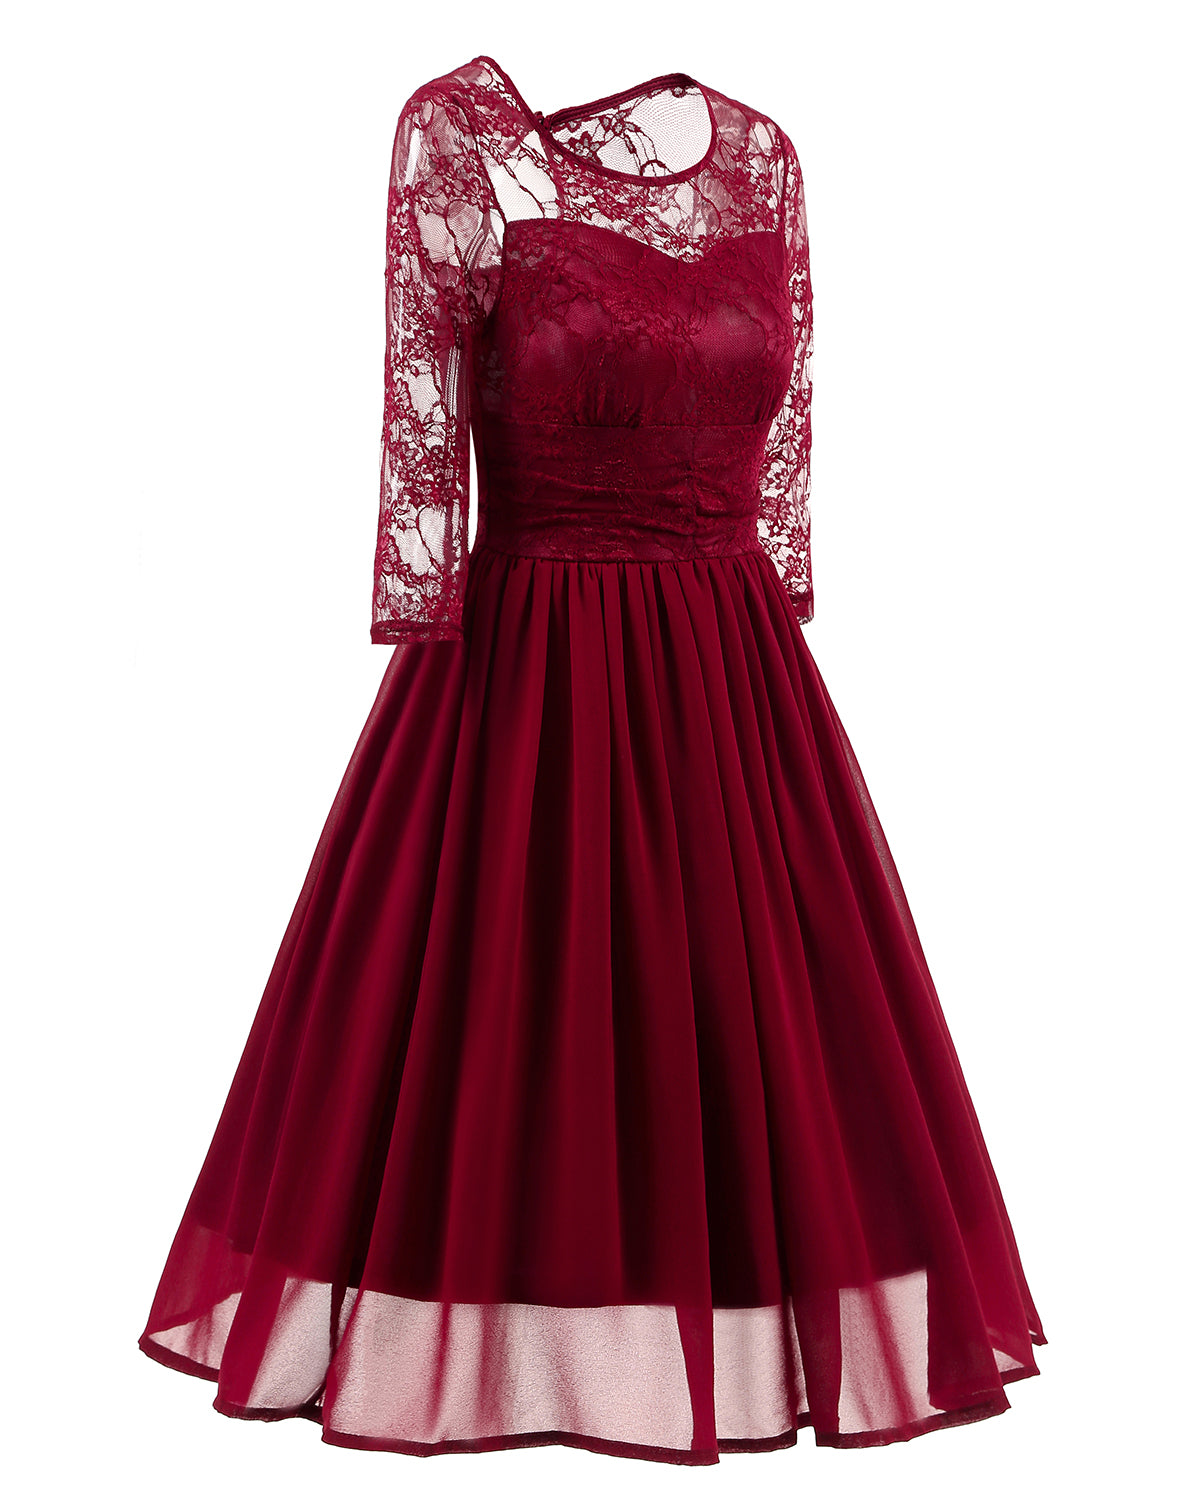 Classy Short Prom Dress with Sleeves,Vintage Prom Dress, Maroon Prom ...